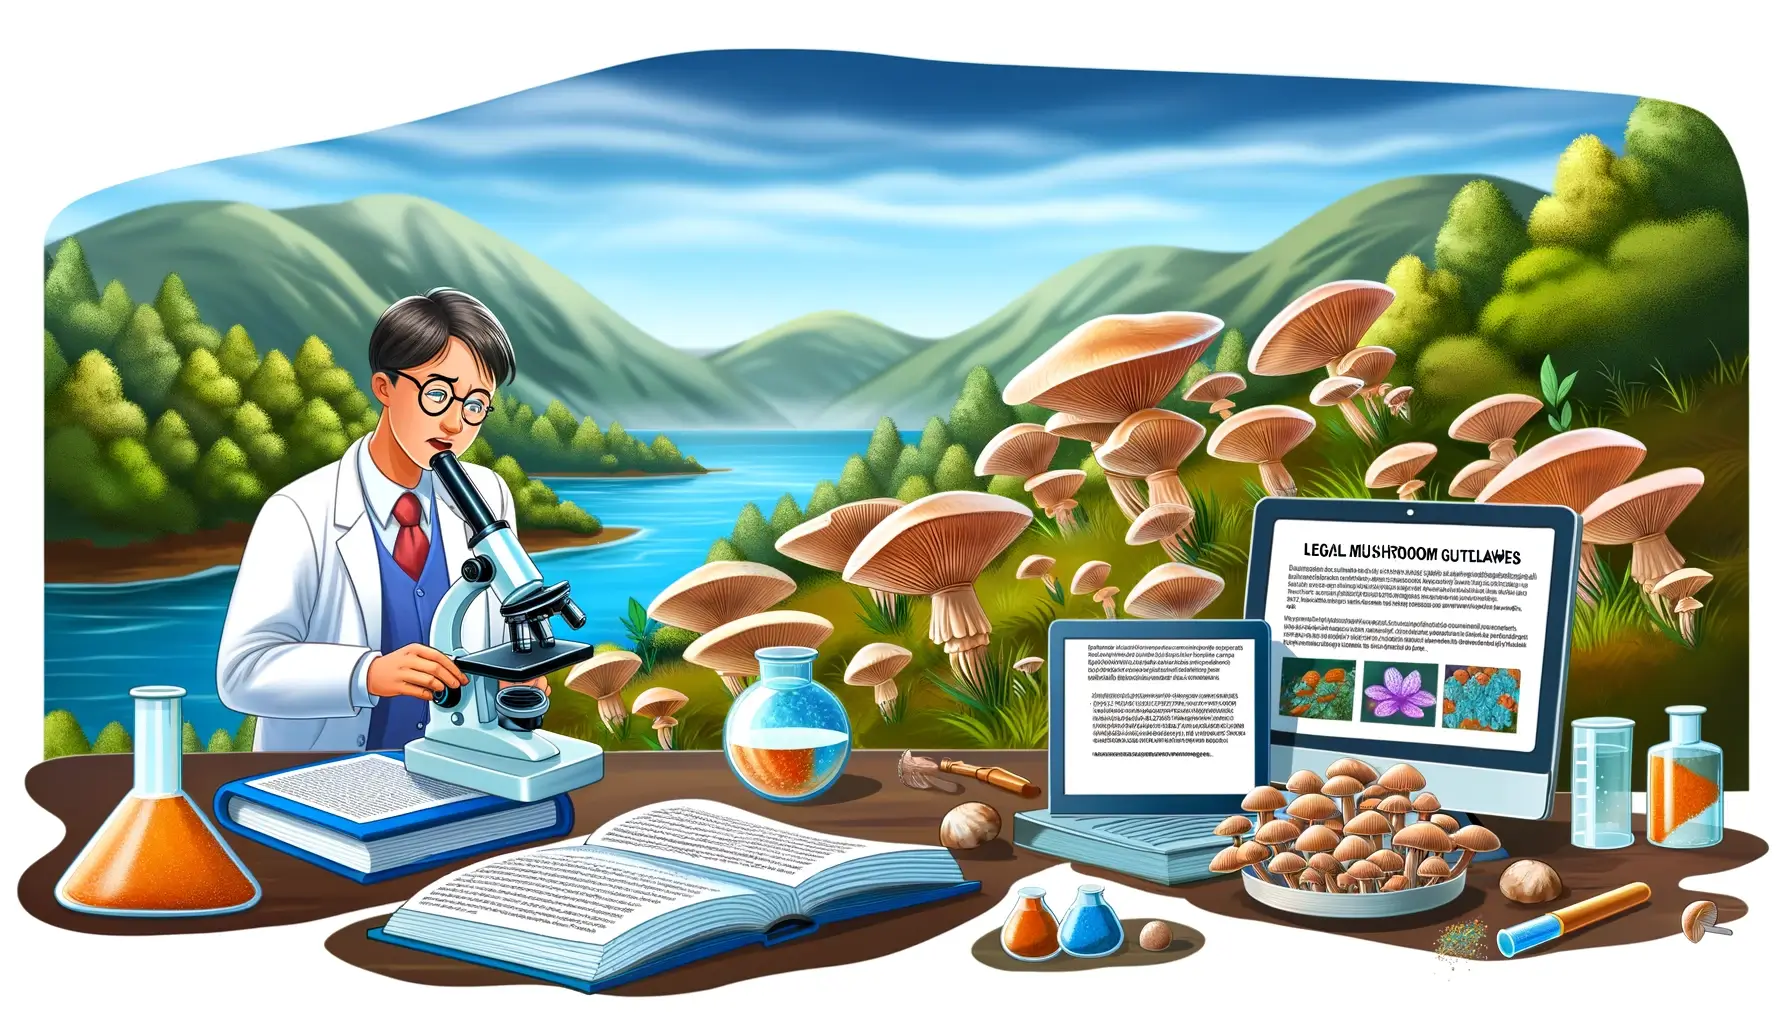 Scientist examining mushroom spores in a lab, surrounded by legal guides and nature.